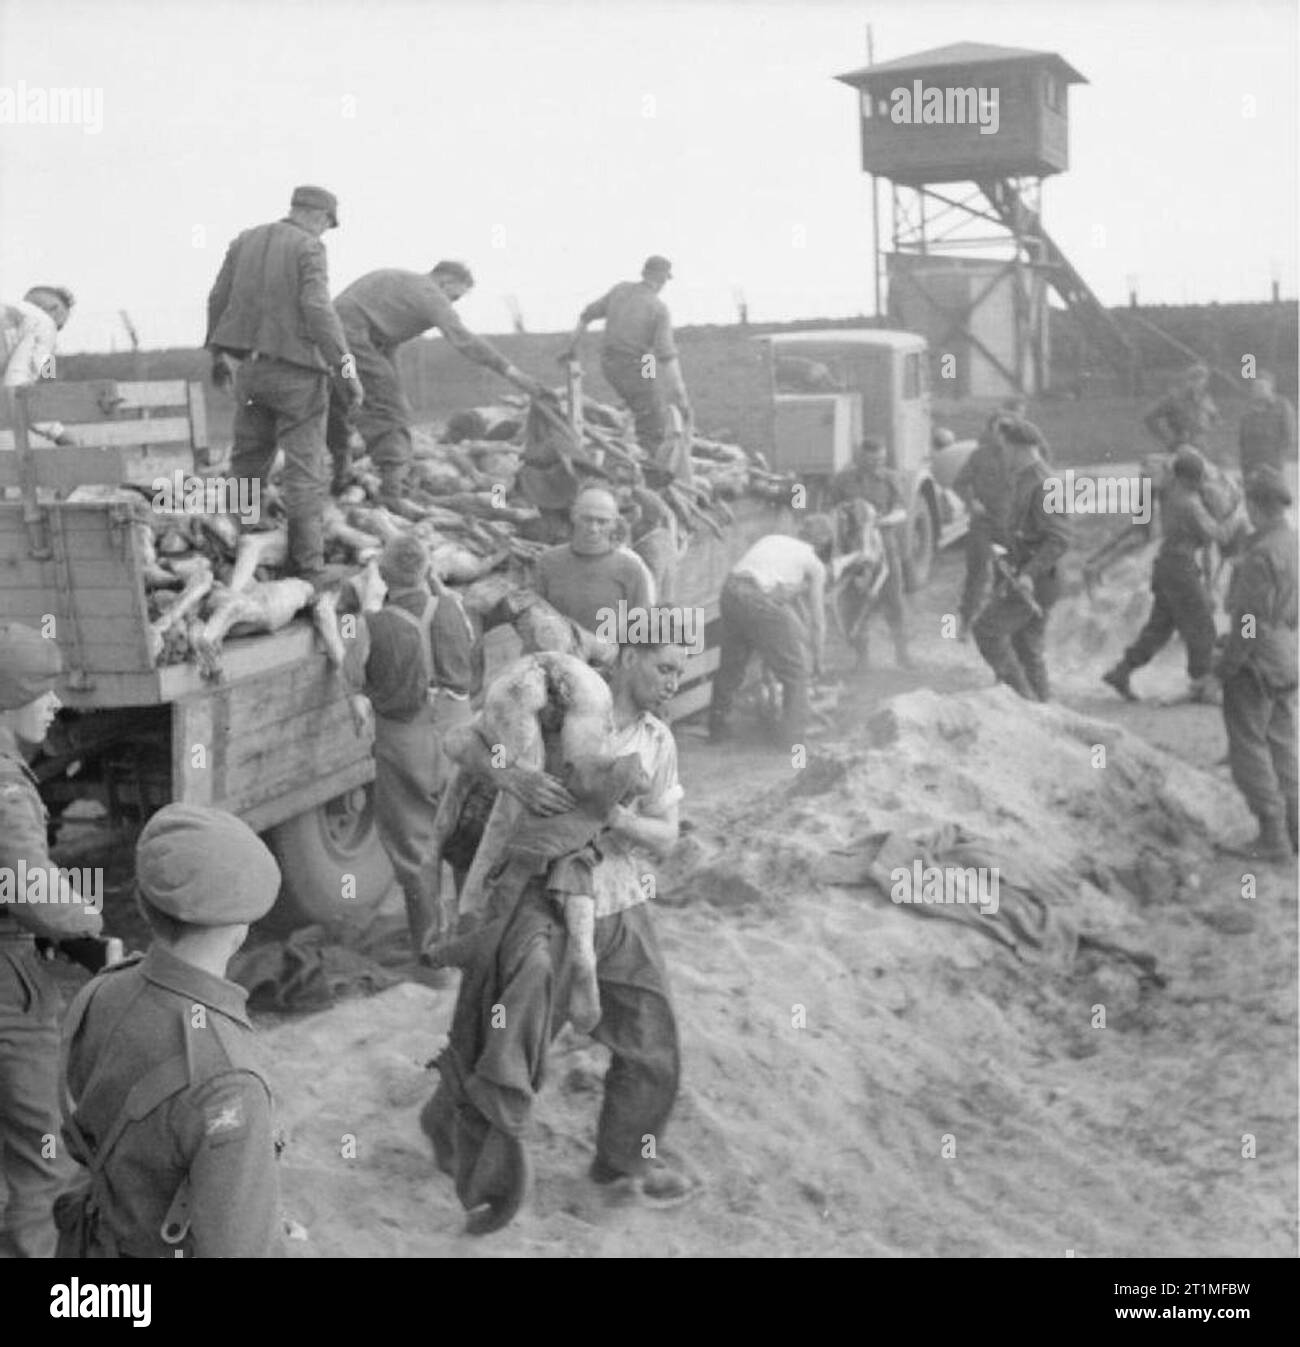 The Liberation of Bergen-belsen Concentration Camp, April 1945 SS camp guards remove bodies from lorries and carry them to the mass grave. Stock Photo